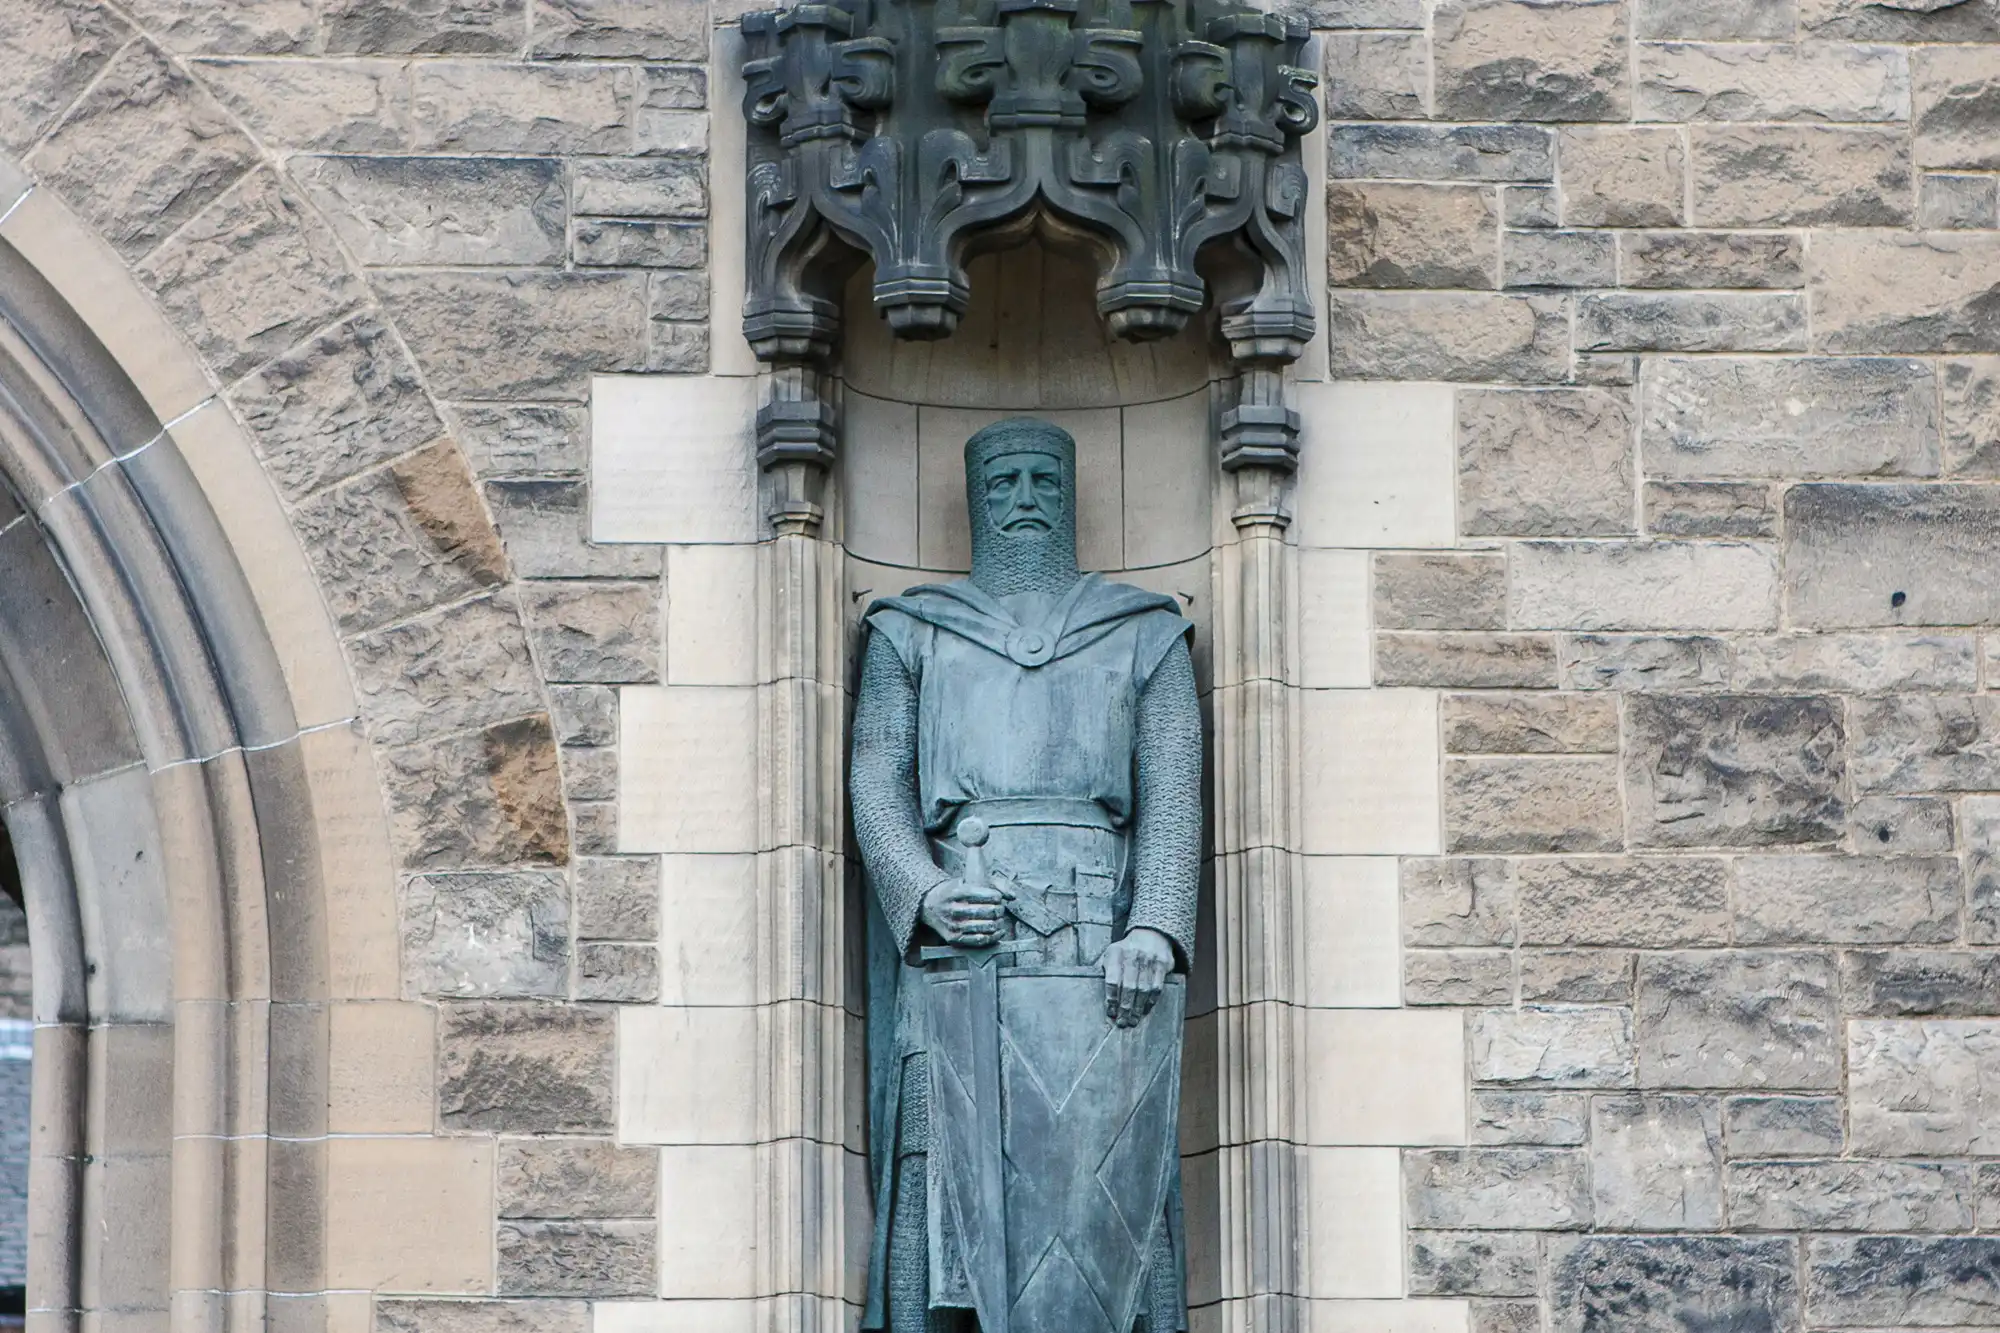 Stone statue of a medieval knight in armor, standing solemnly within a niche on a building's stone facade.